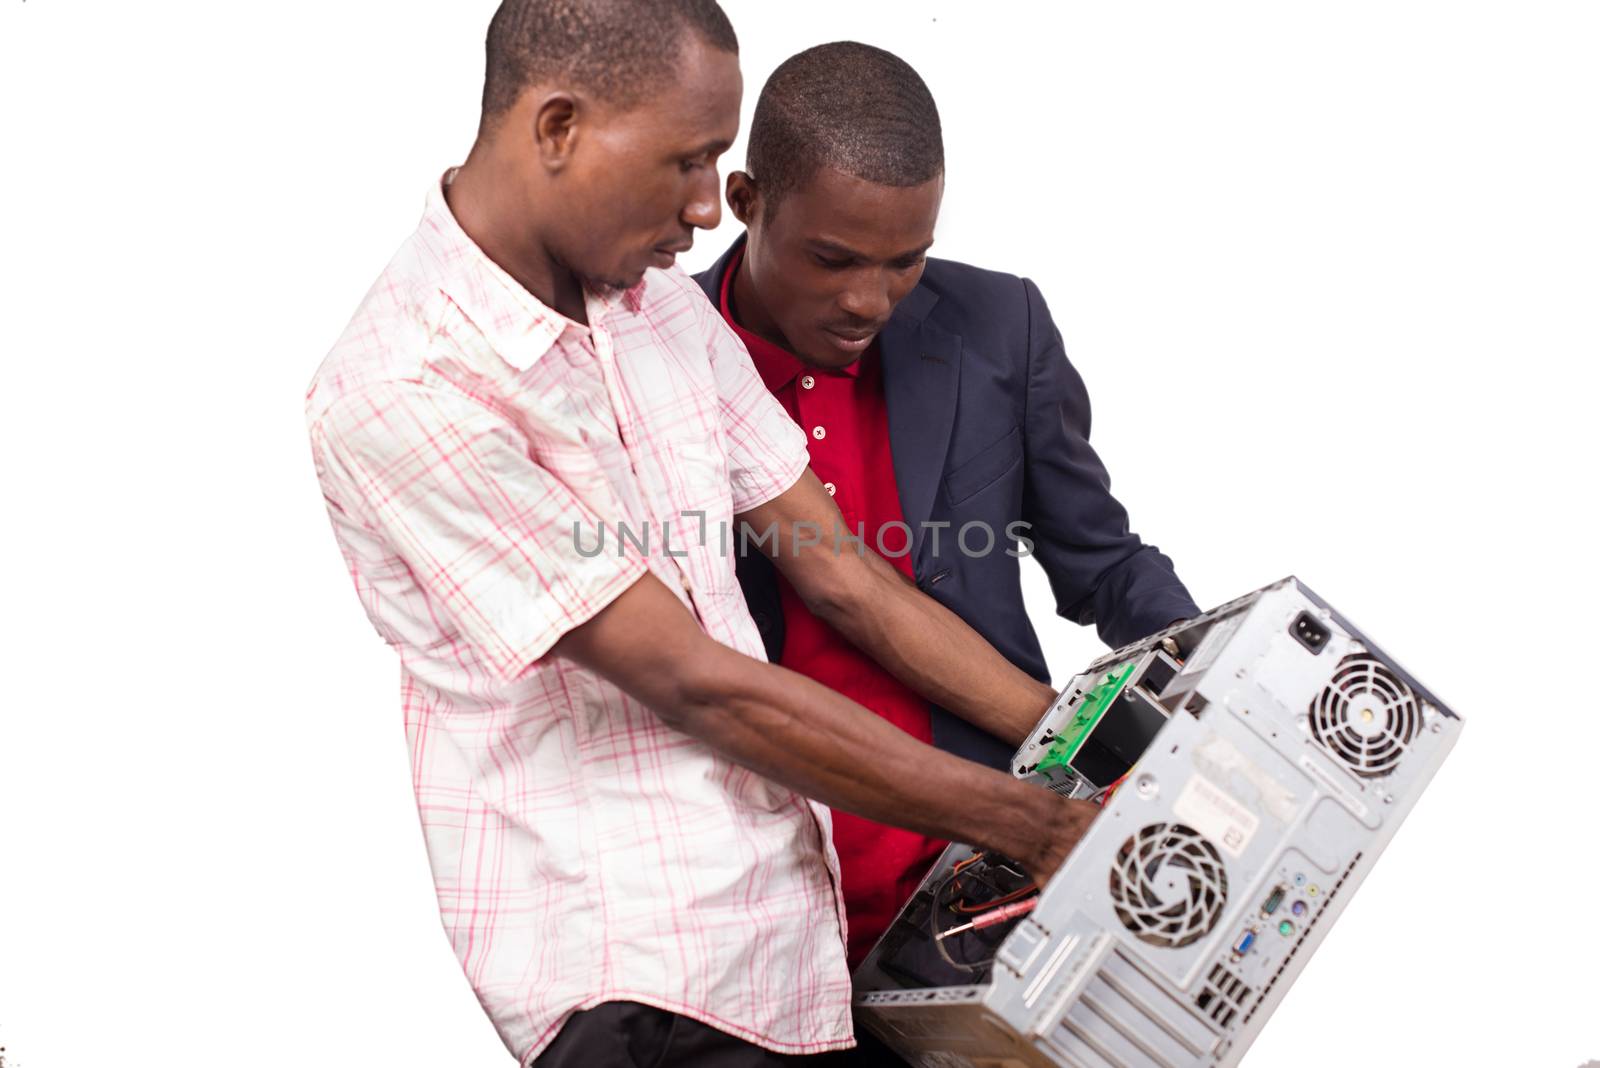 Technician repairing a broken down computer in an office in front of his boss